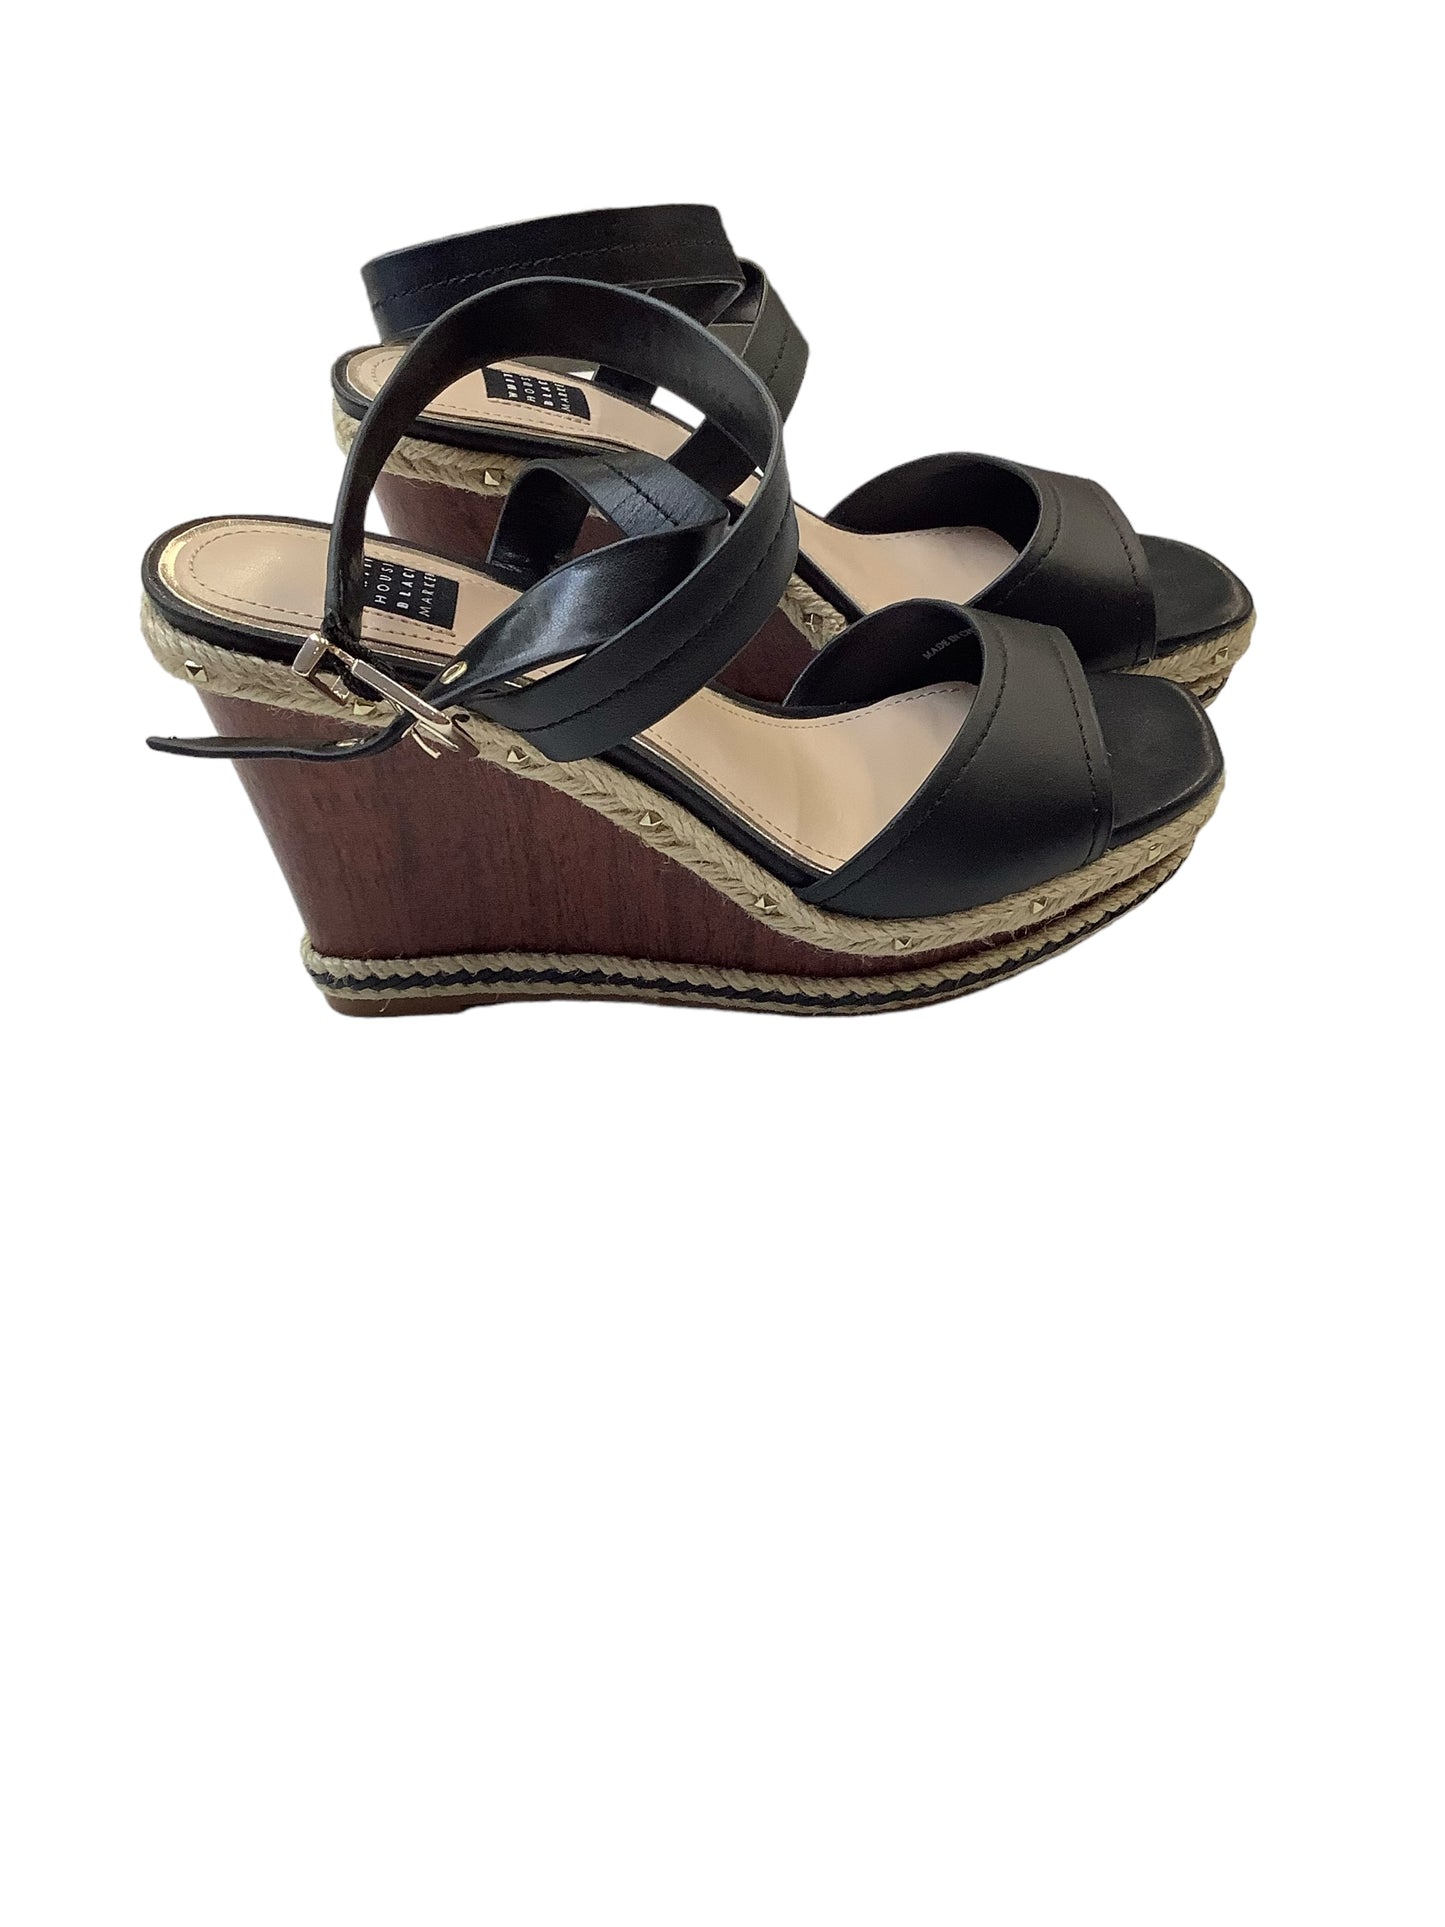 Sandals Heels Wedge By White House Black Market  Size: 6